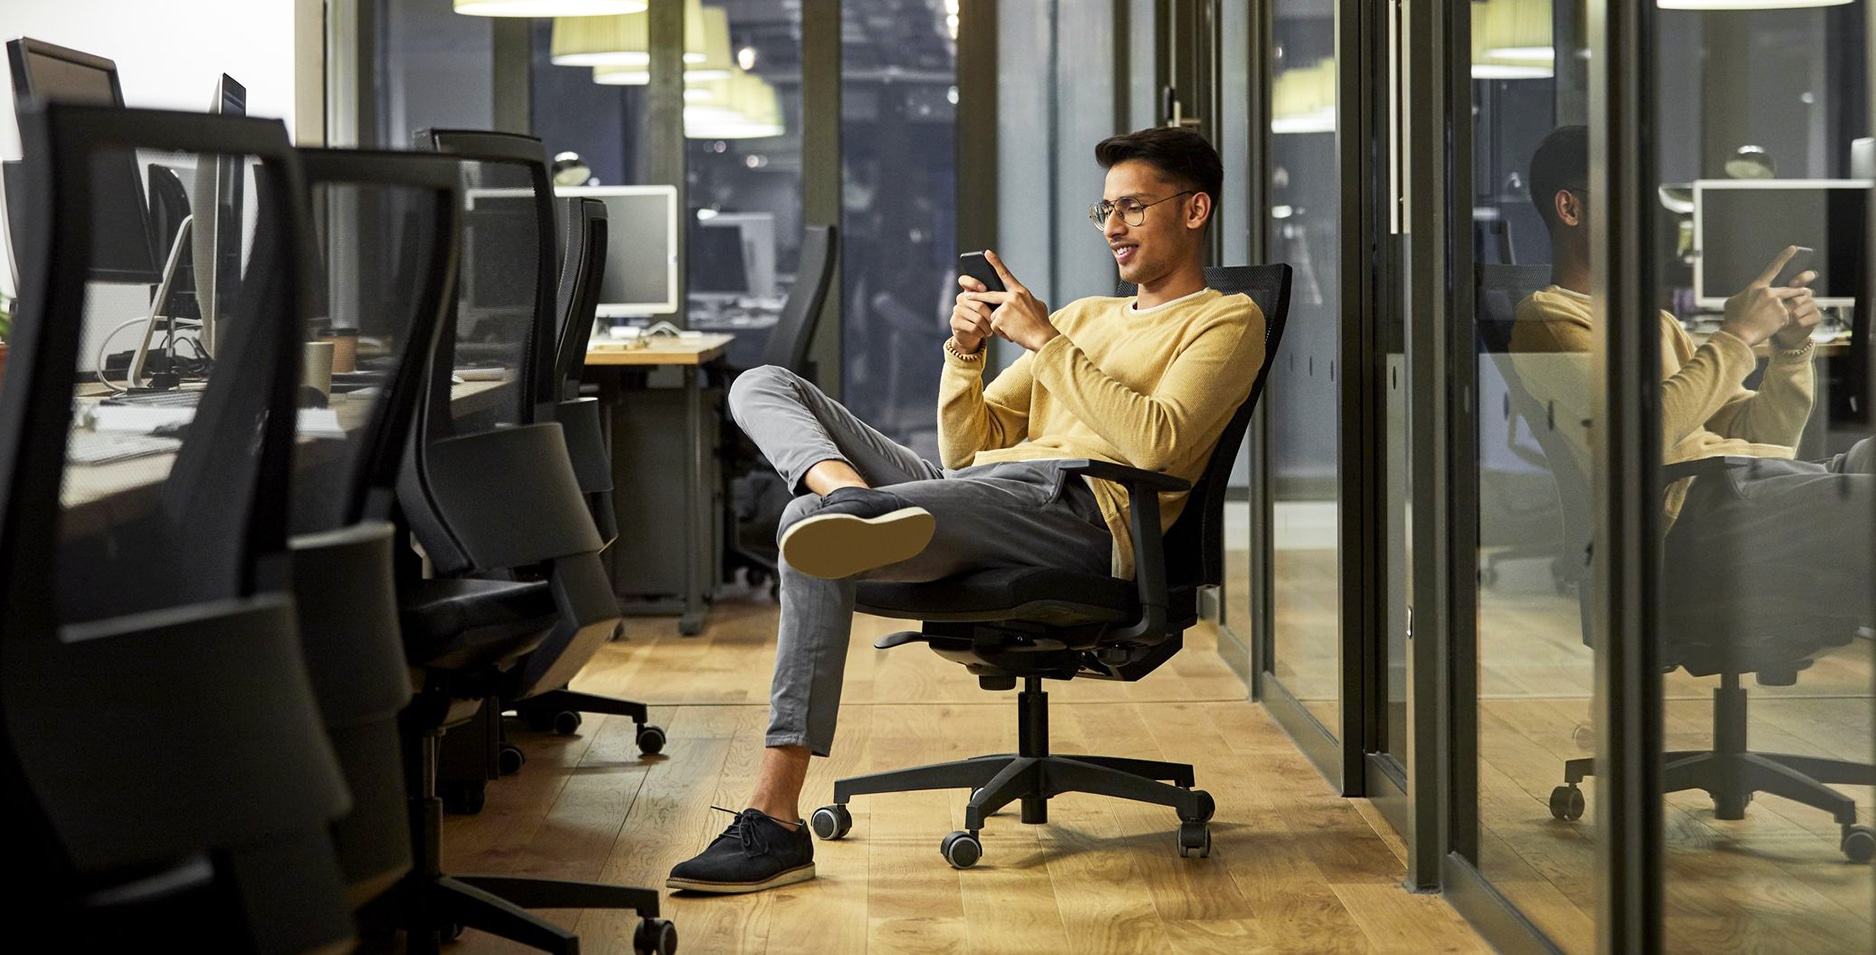 6 Best Office Chairs under $200 (Spring 2022) – Reviews & Buying Guide